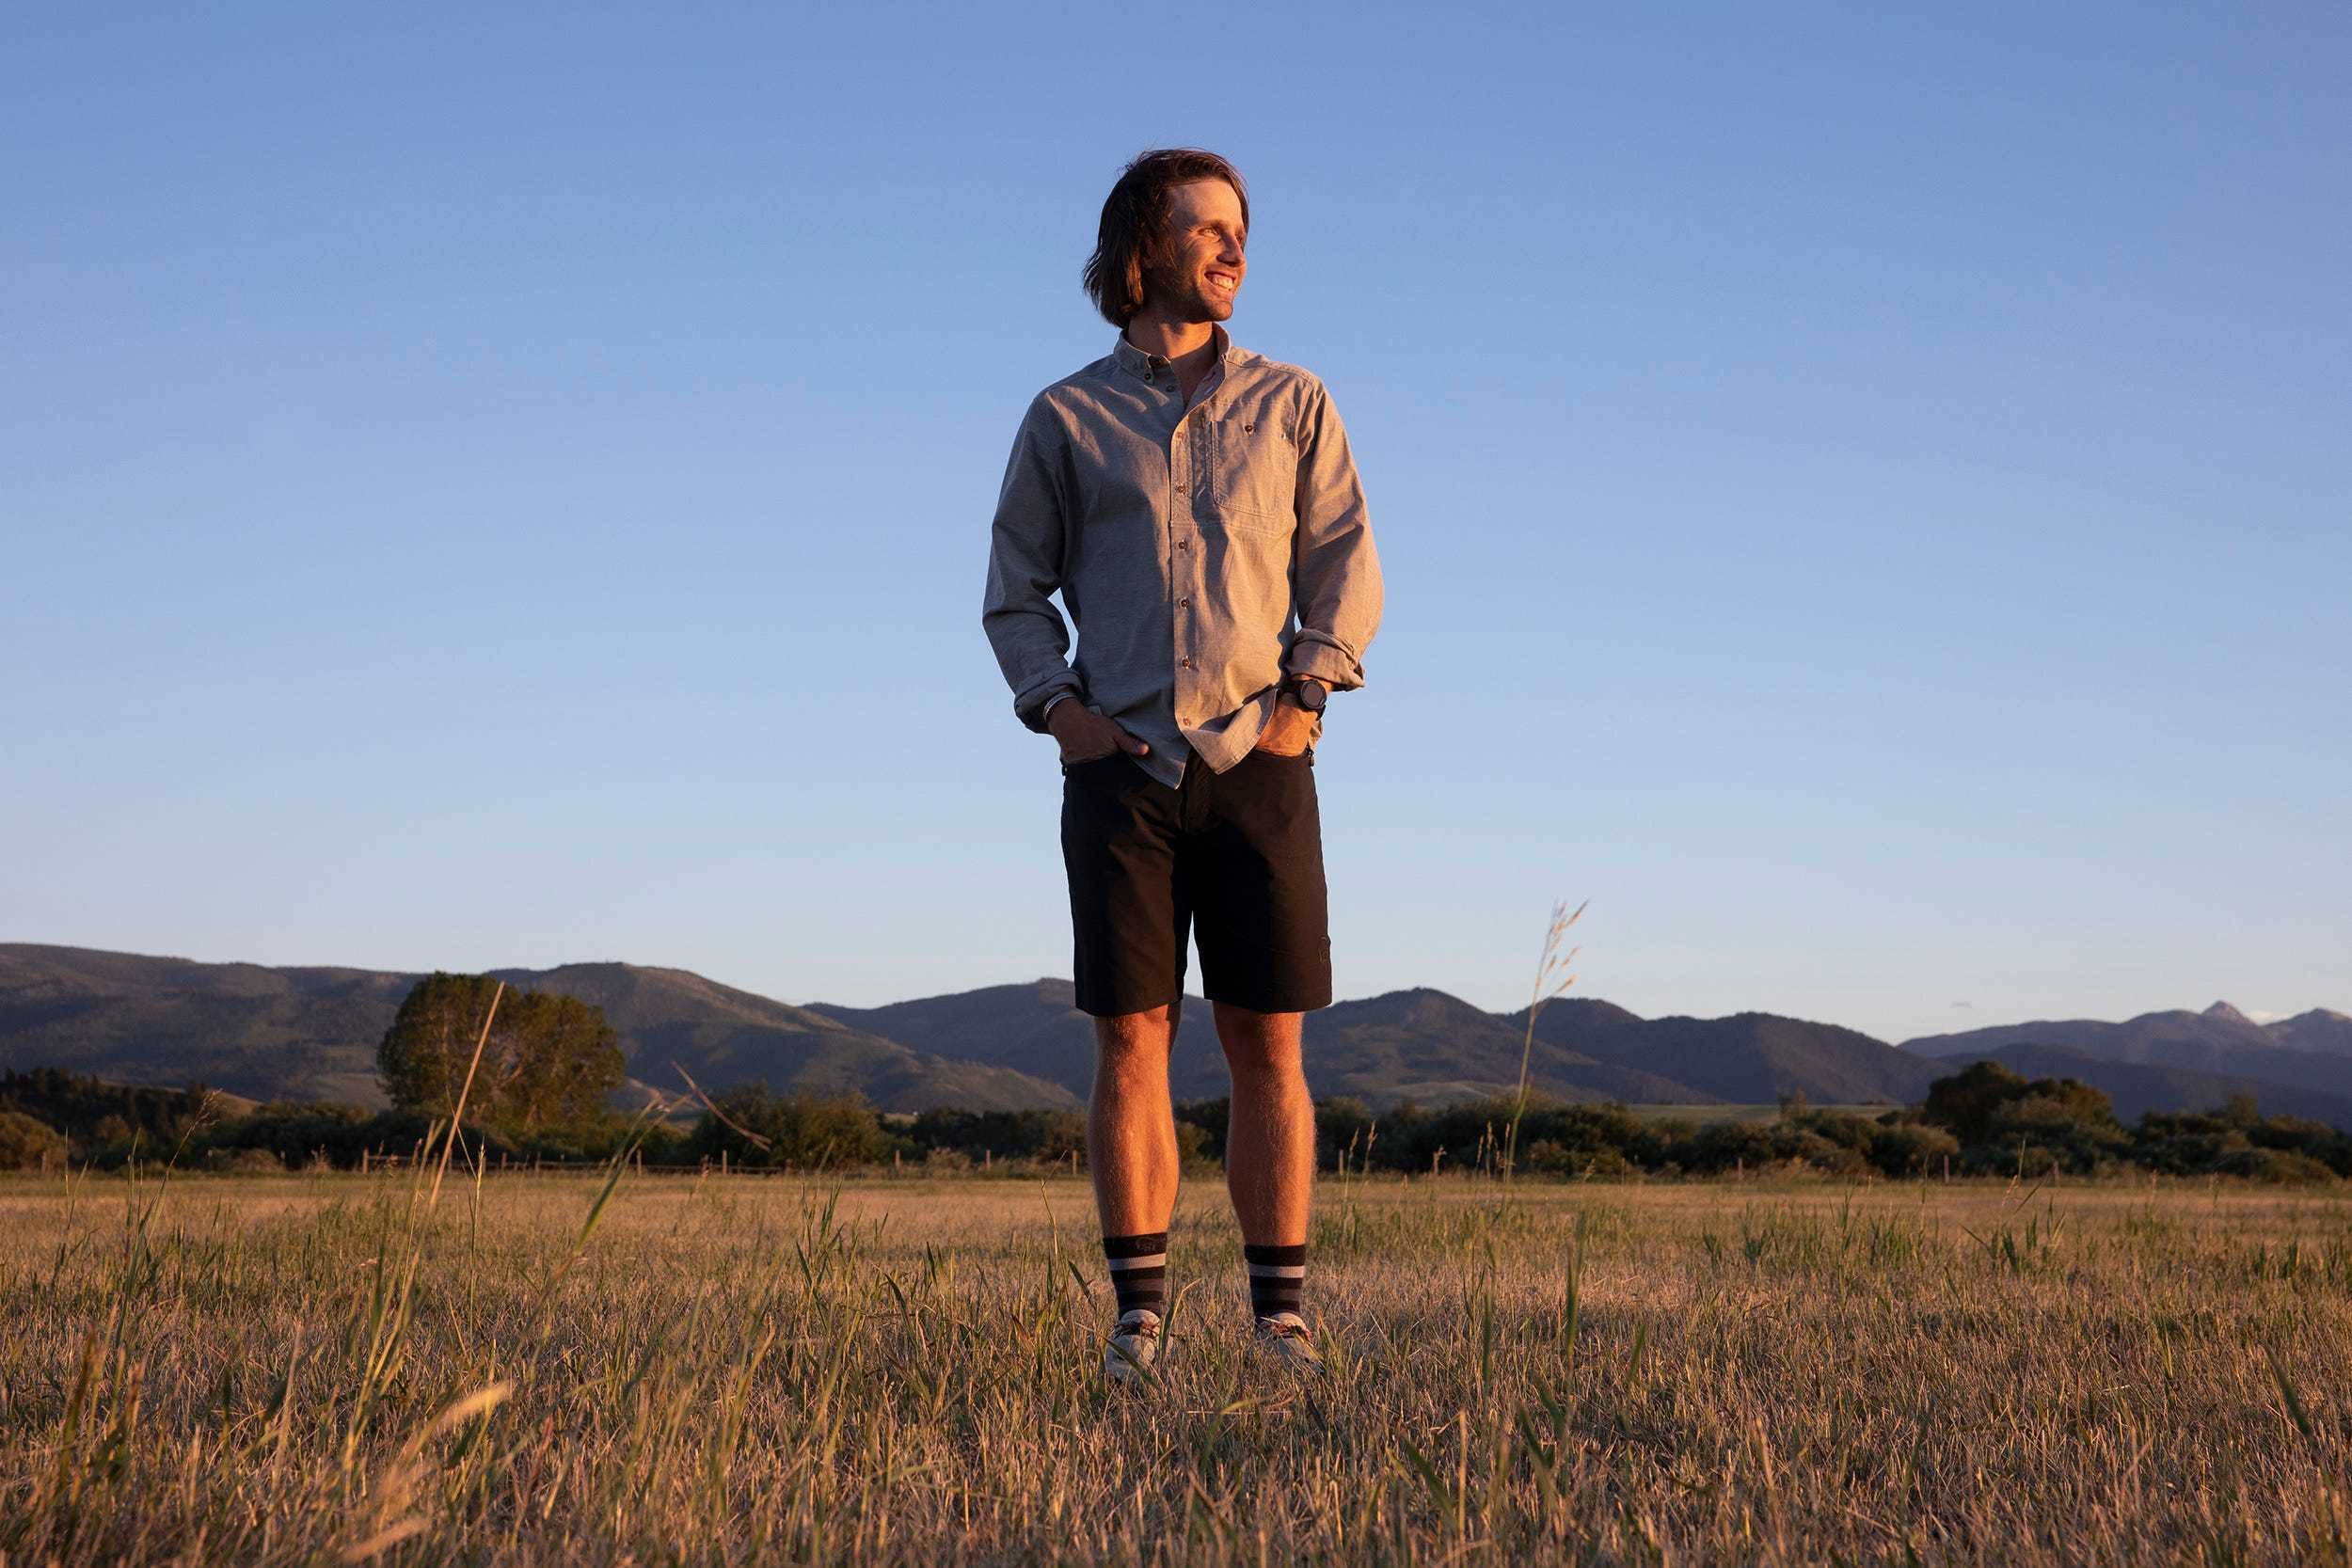 Ecologist Charles Post wears a gray button-up shirt with black shorts and striped long socks while posing in an open field.